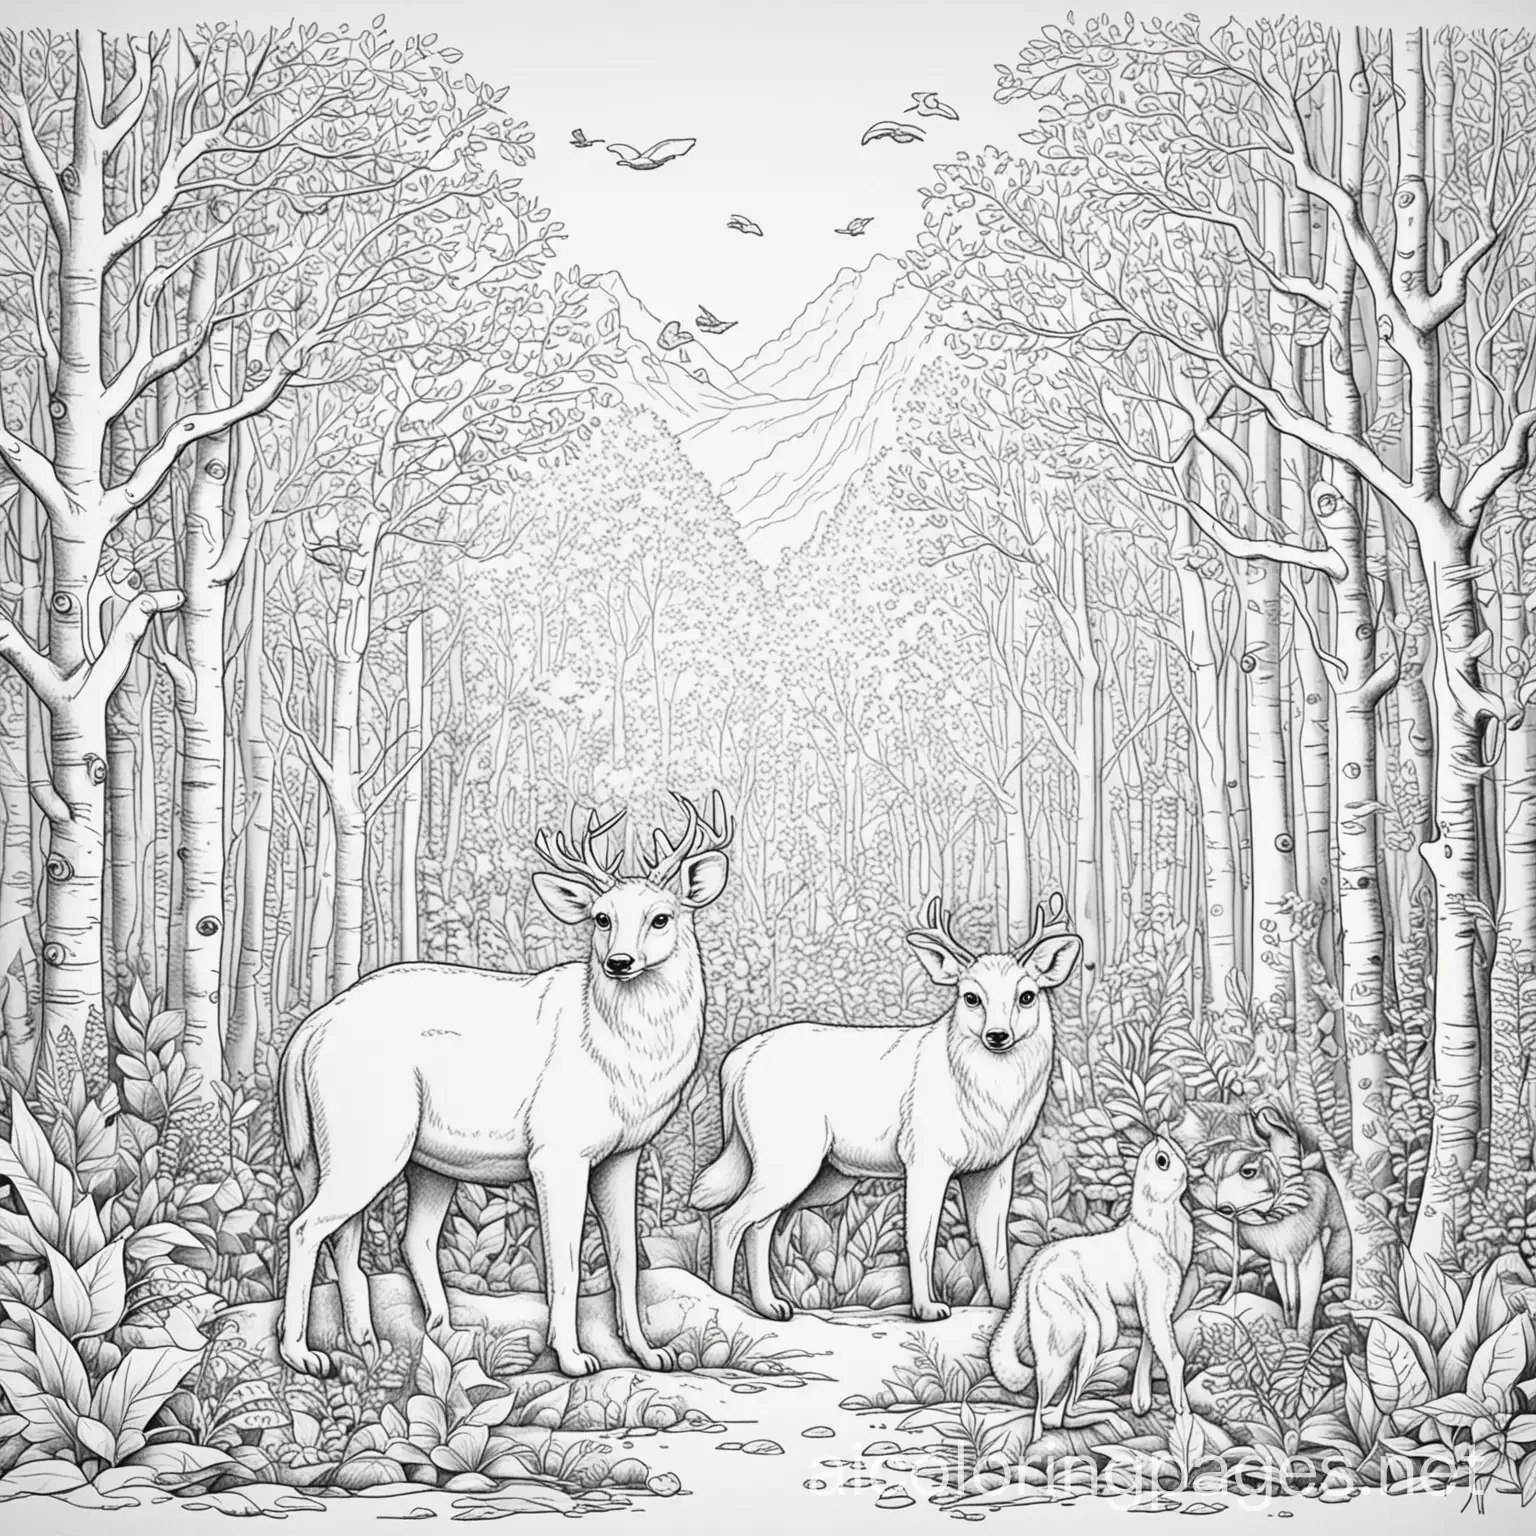  Forest animals drawing, Coloring Page, black and white, line art, white background, Simplicity, Ample White Space. The background of the coloring page is a plain white backdrop to make it easy for young children to color within the lines. The outlines of all the subjects are easily distinguishable, making it simple for kids to color without too much difficulty.

(The input does not seem to be in any language other than English, so translation is not necessary.)